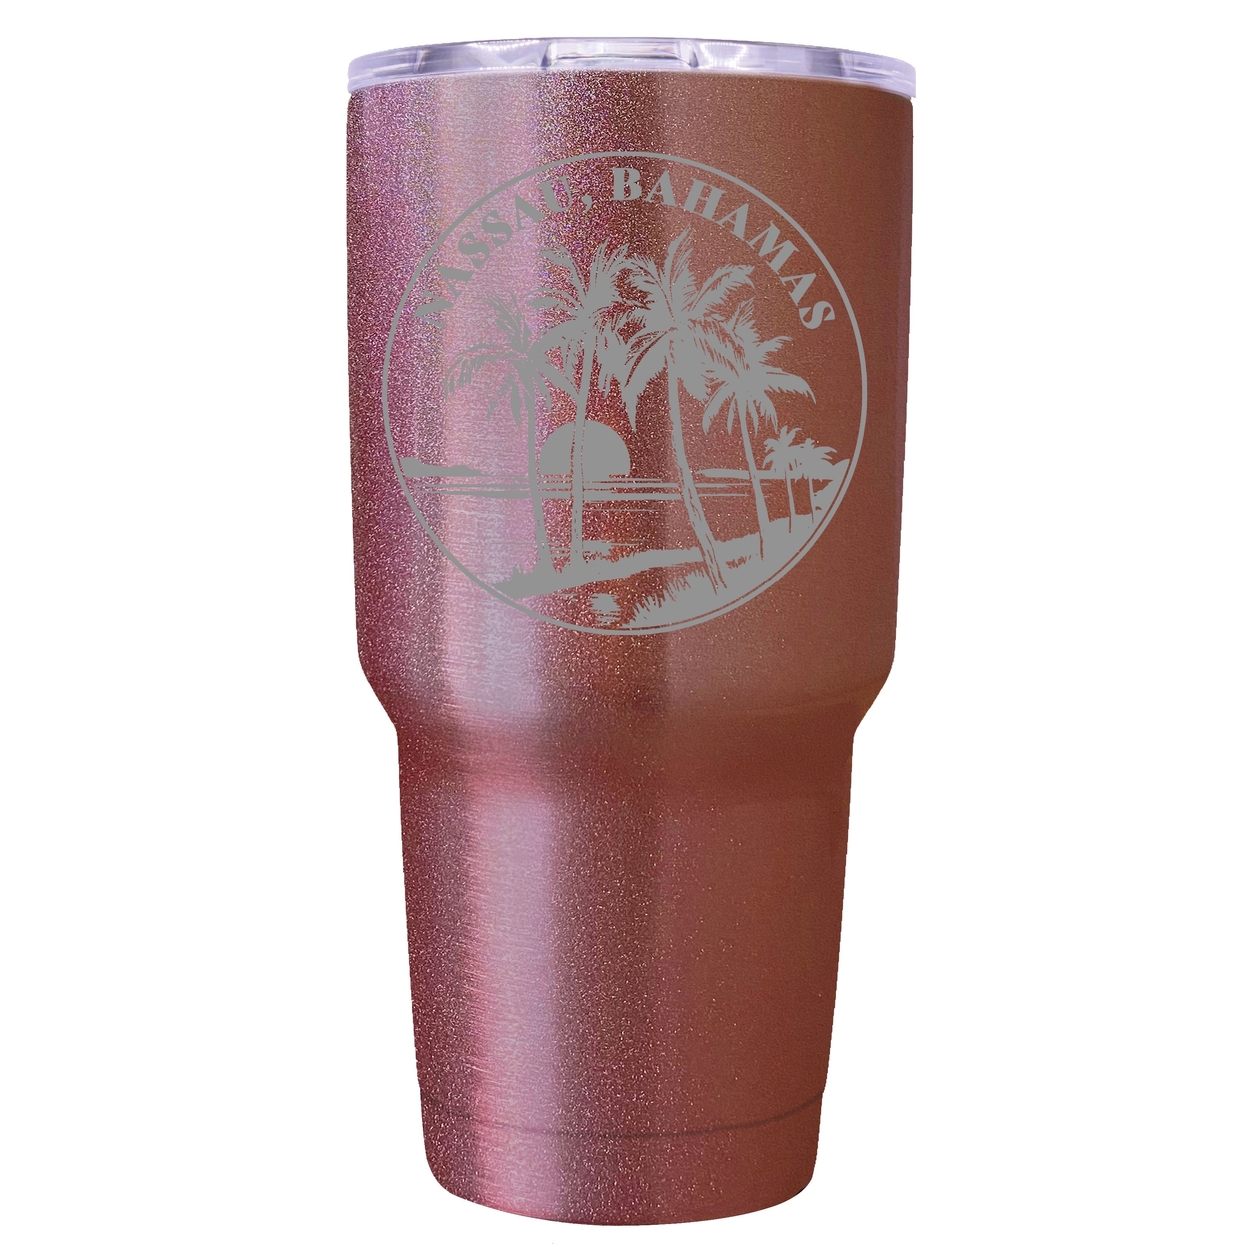 Nassau The Bahamas Souvenir 24 Oz Engraved Insulated Stainless Steel Tumbler - Rose Gold,,2-Pack